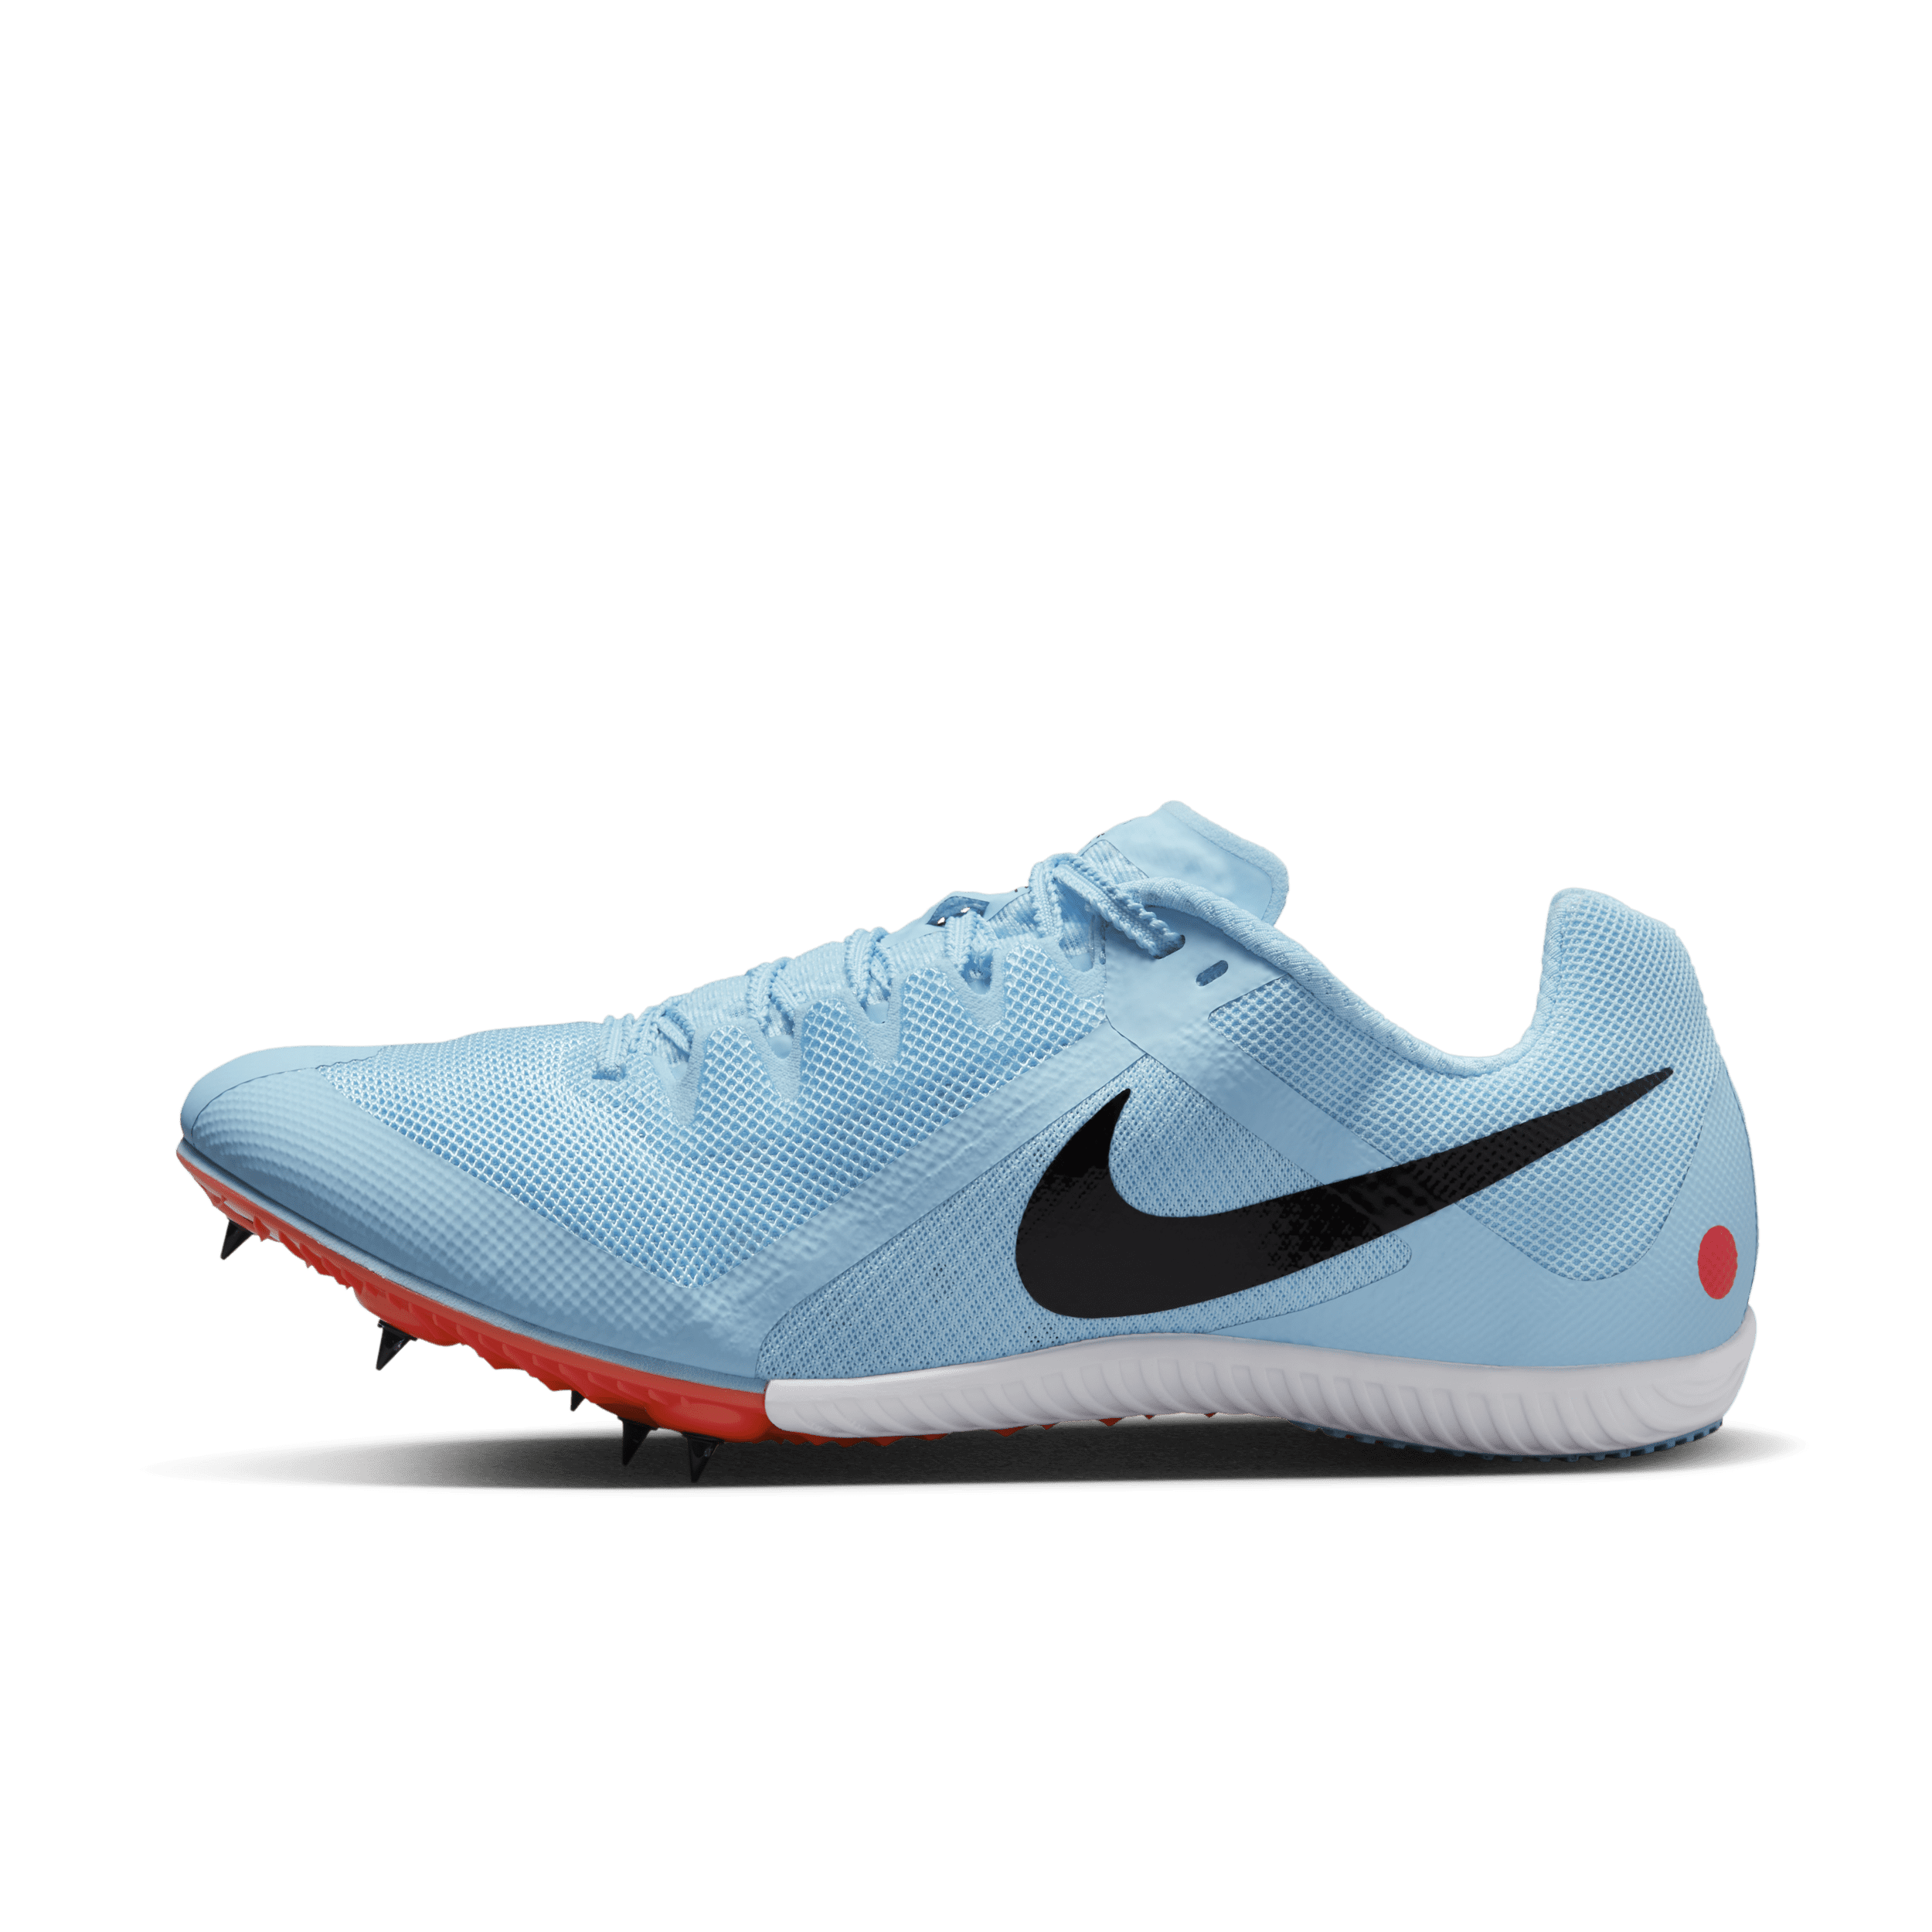 Nike Rival Multi Track and Field multi-event spikes - Blauw